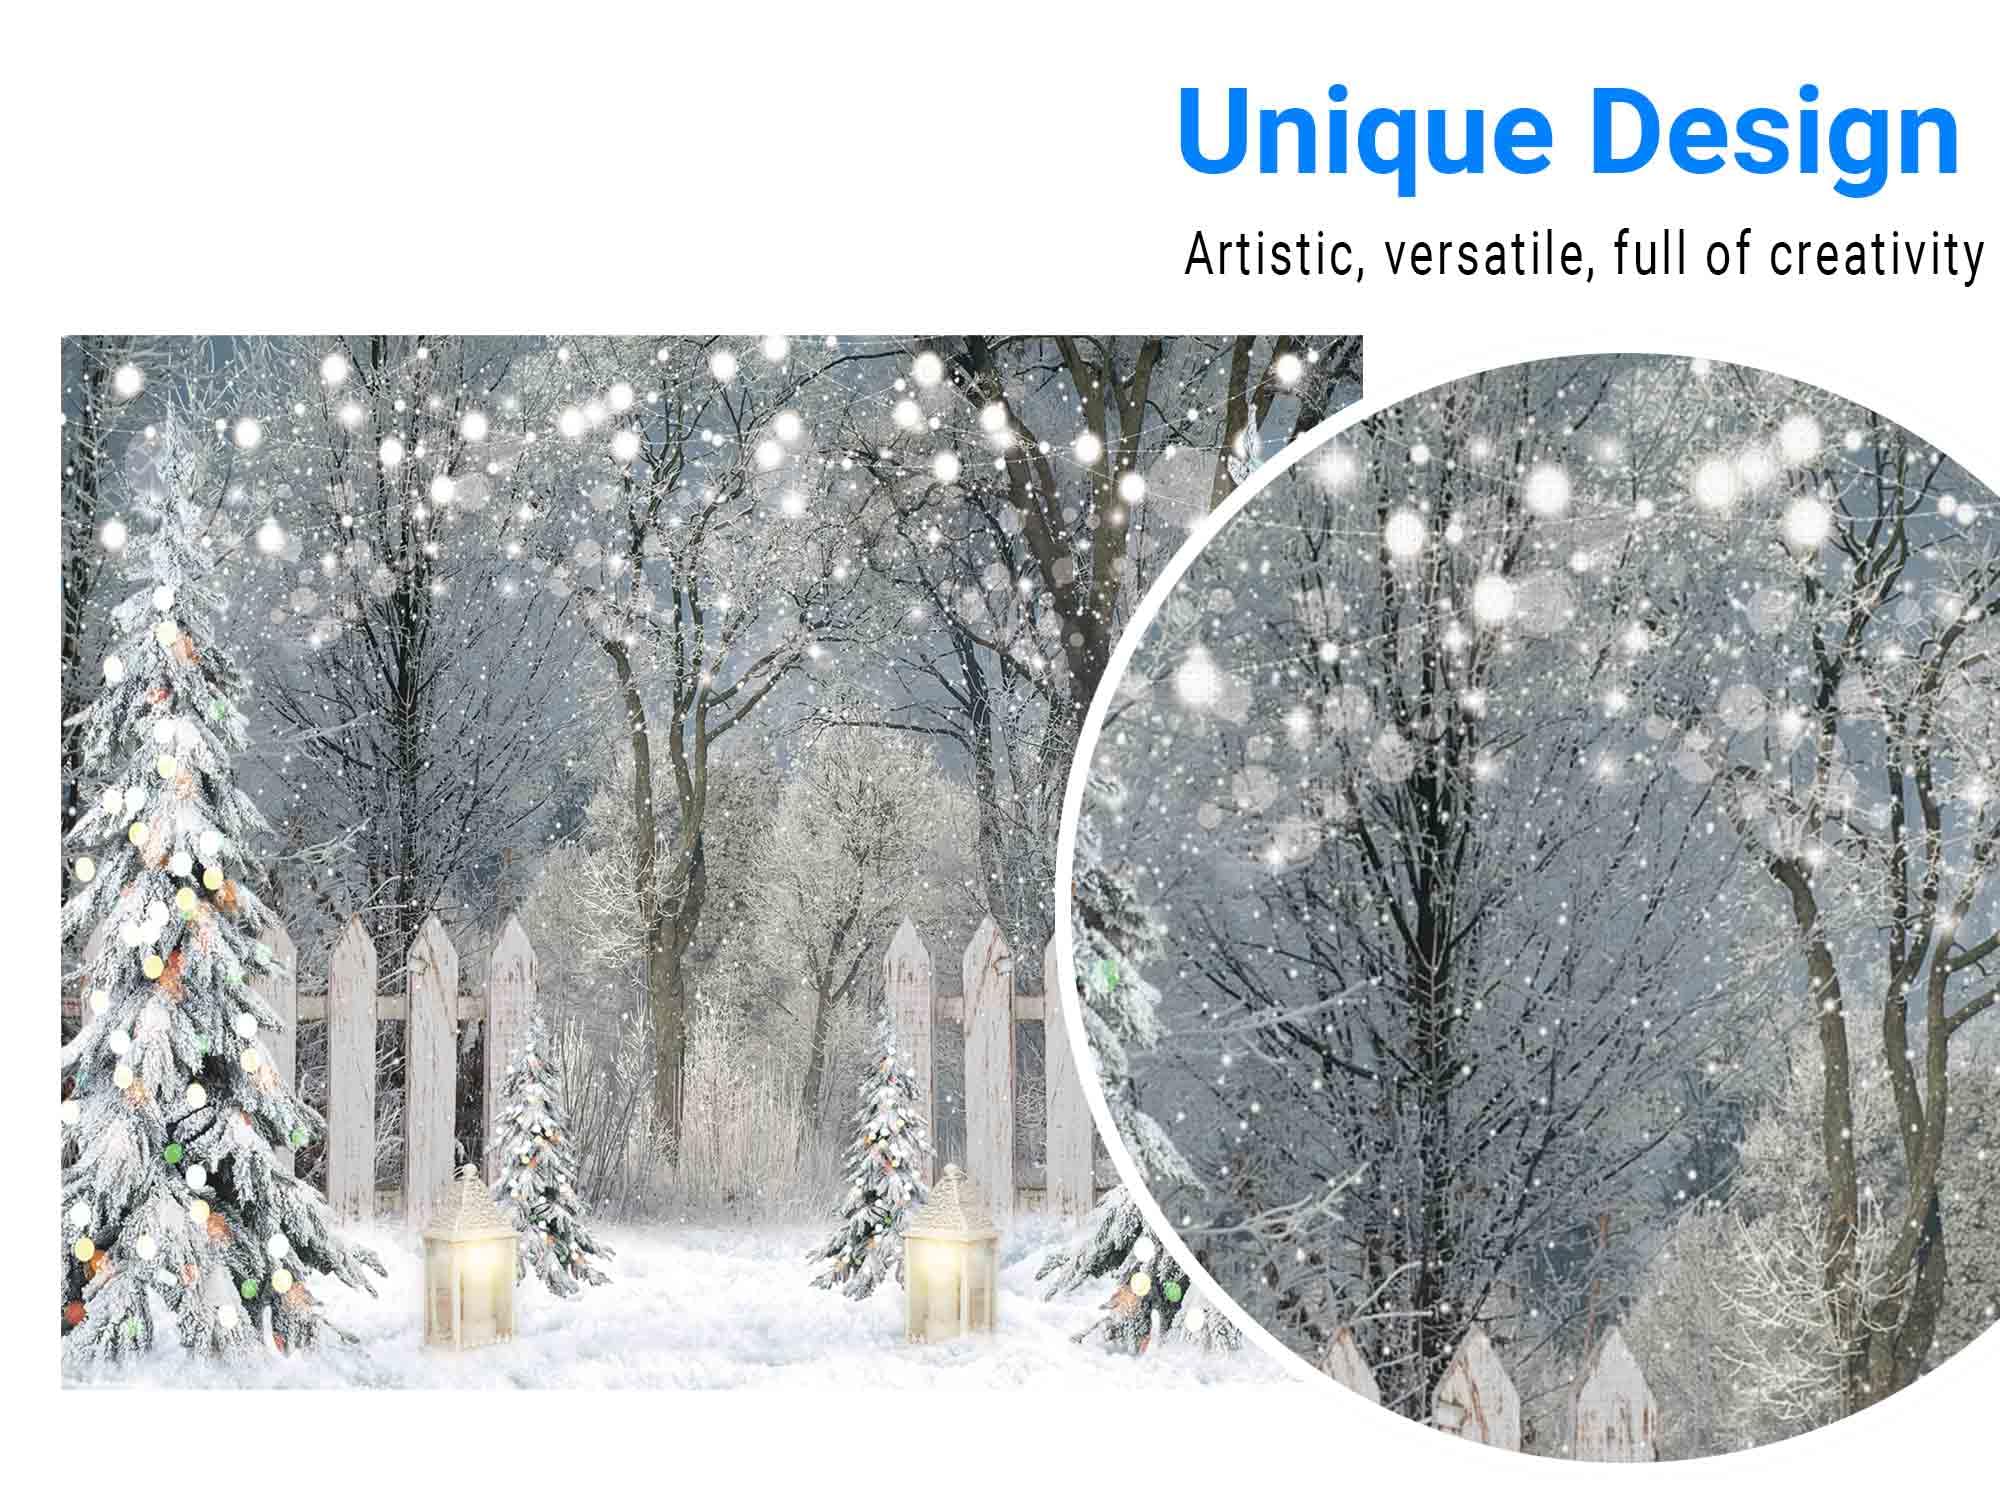 Funnytree 10x8FT Soft Fabric Winter Photography Backdrop Glitter Snowy Forest Pine Tree Background Let It Snow Christmas Xmas Holiday Party Decor Banner Portrait Studio Booth Photobooth Props